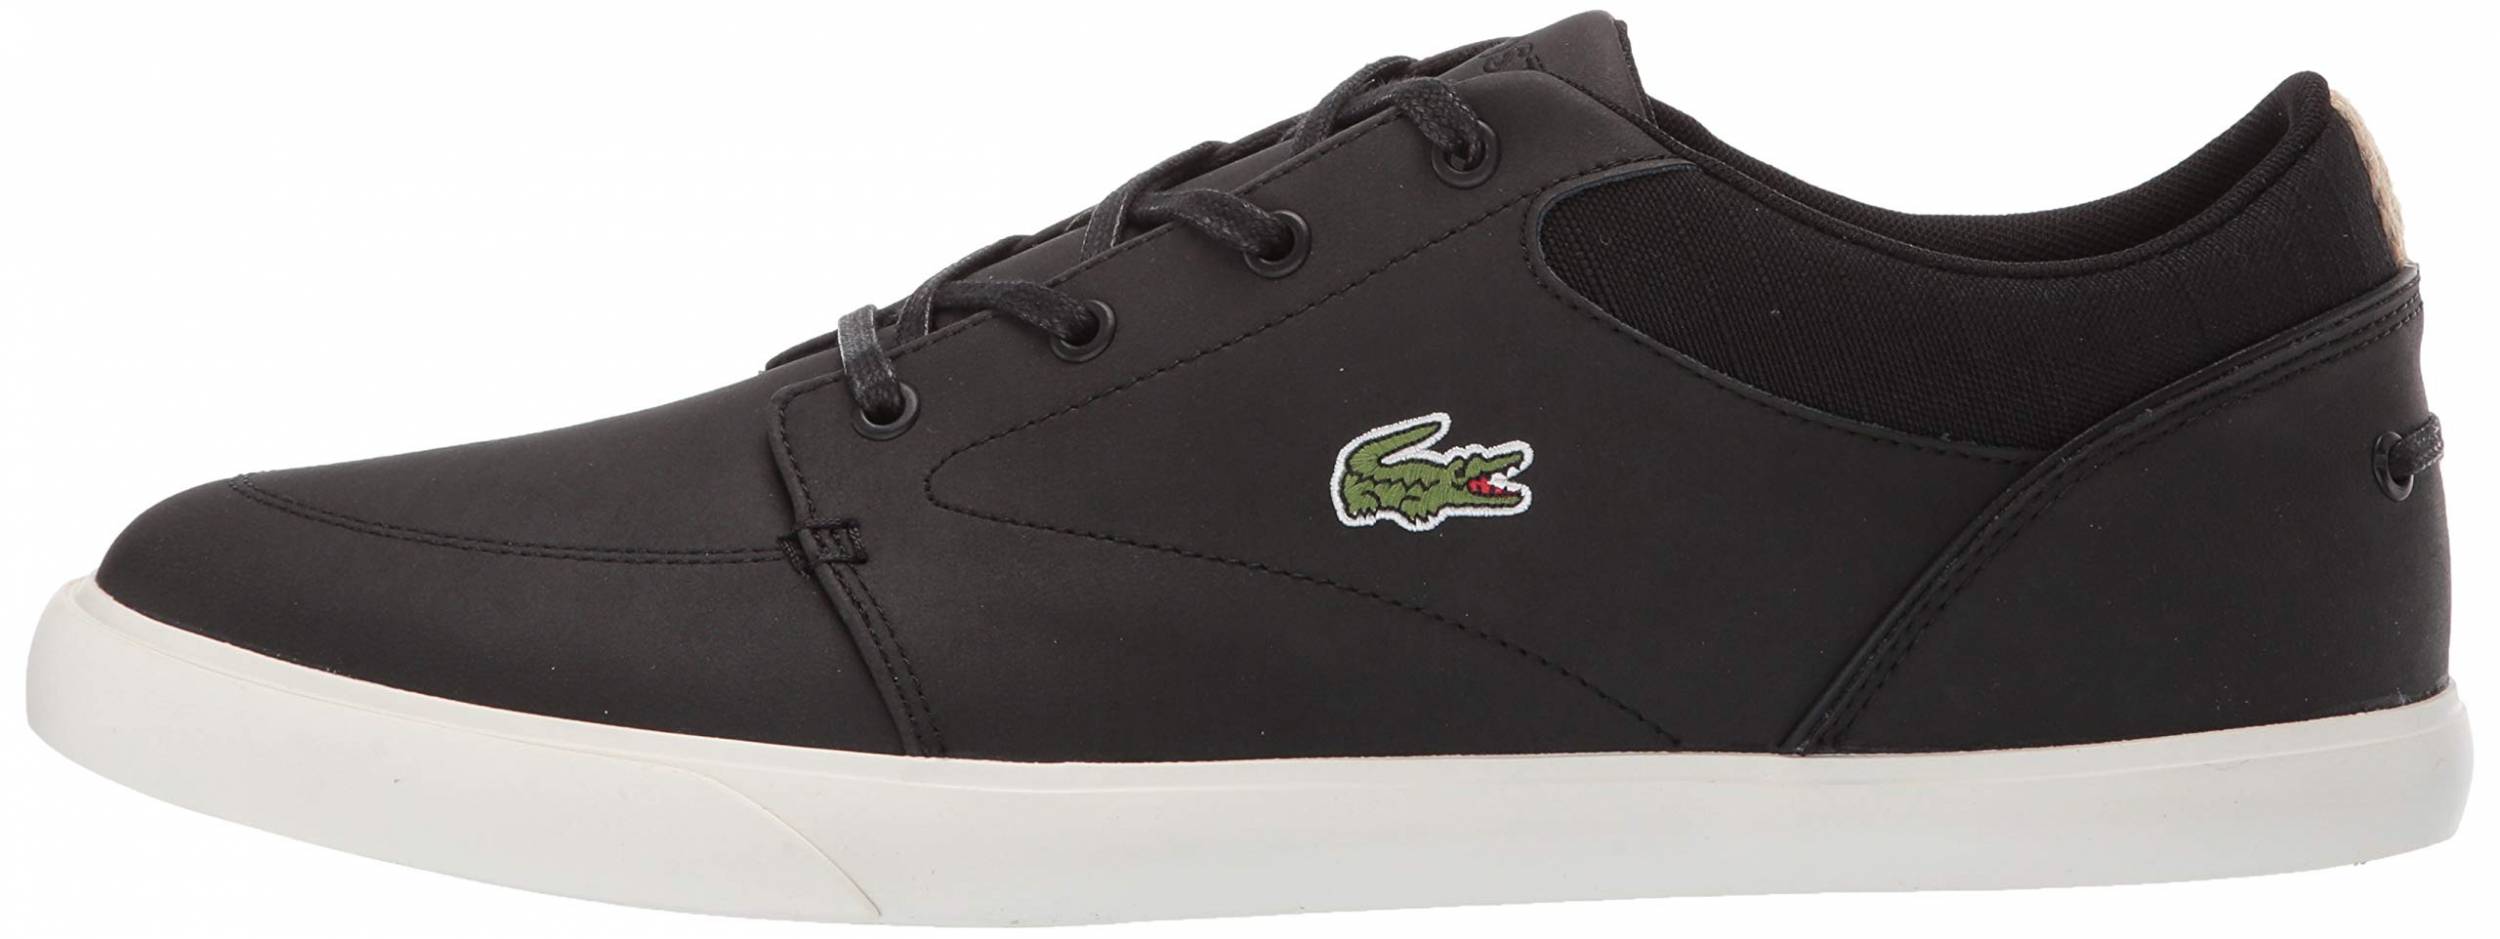 lacoste trainers size 7